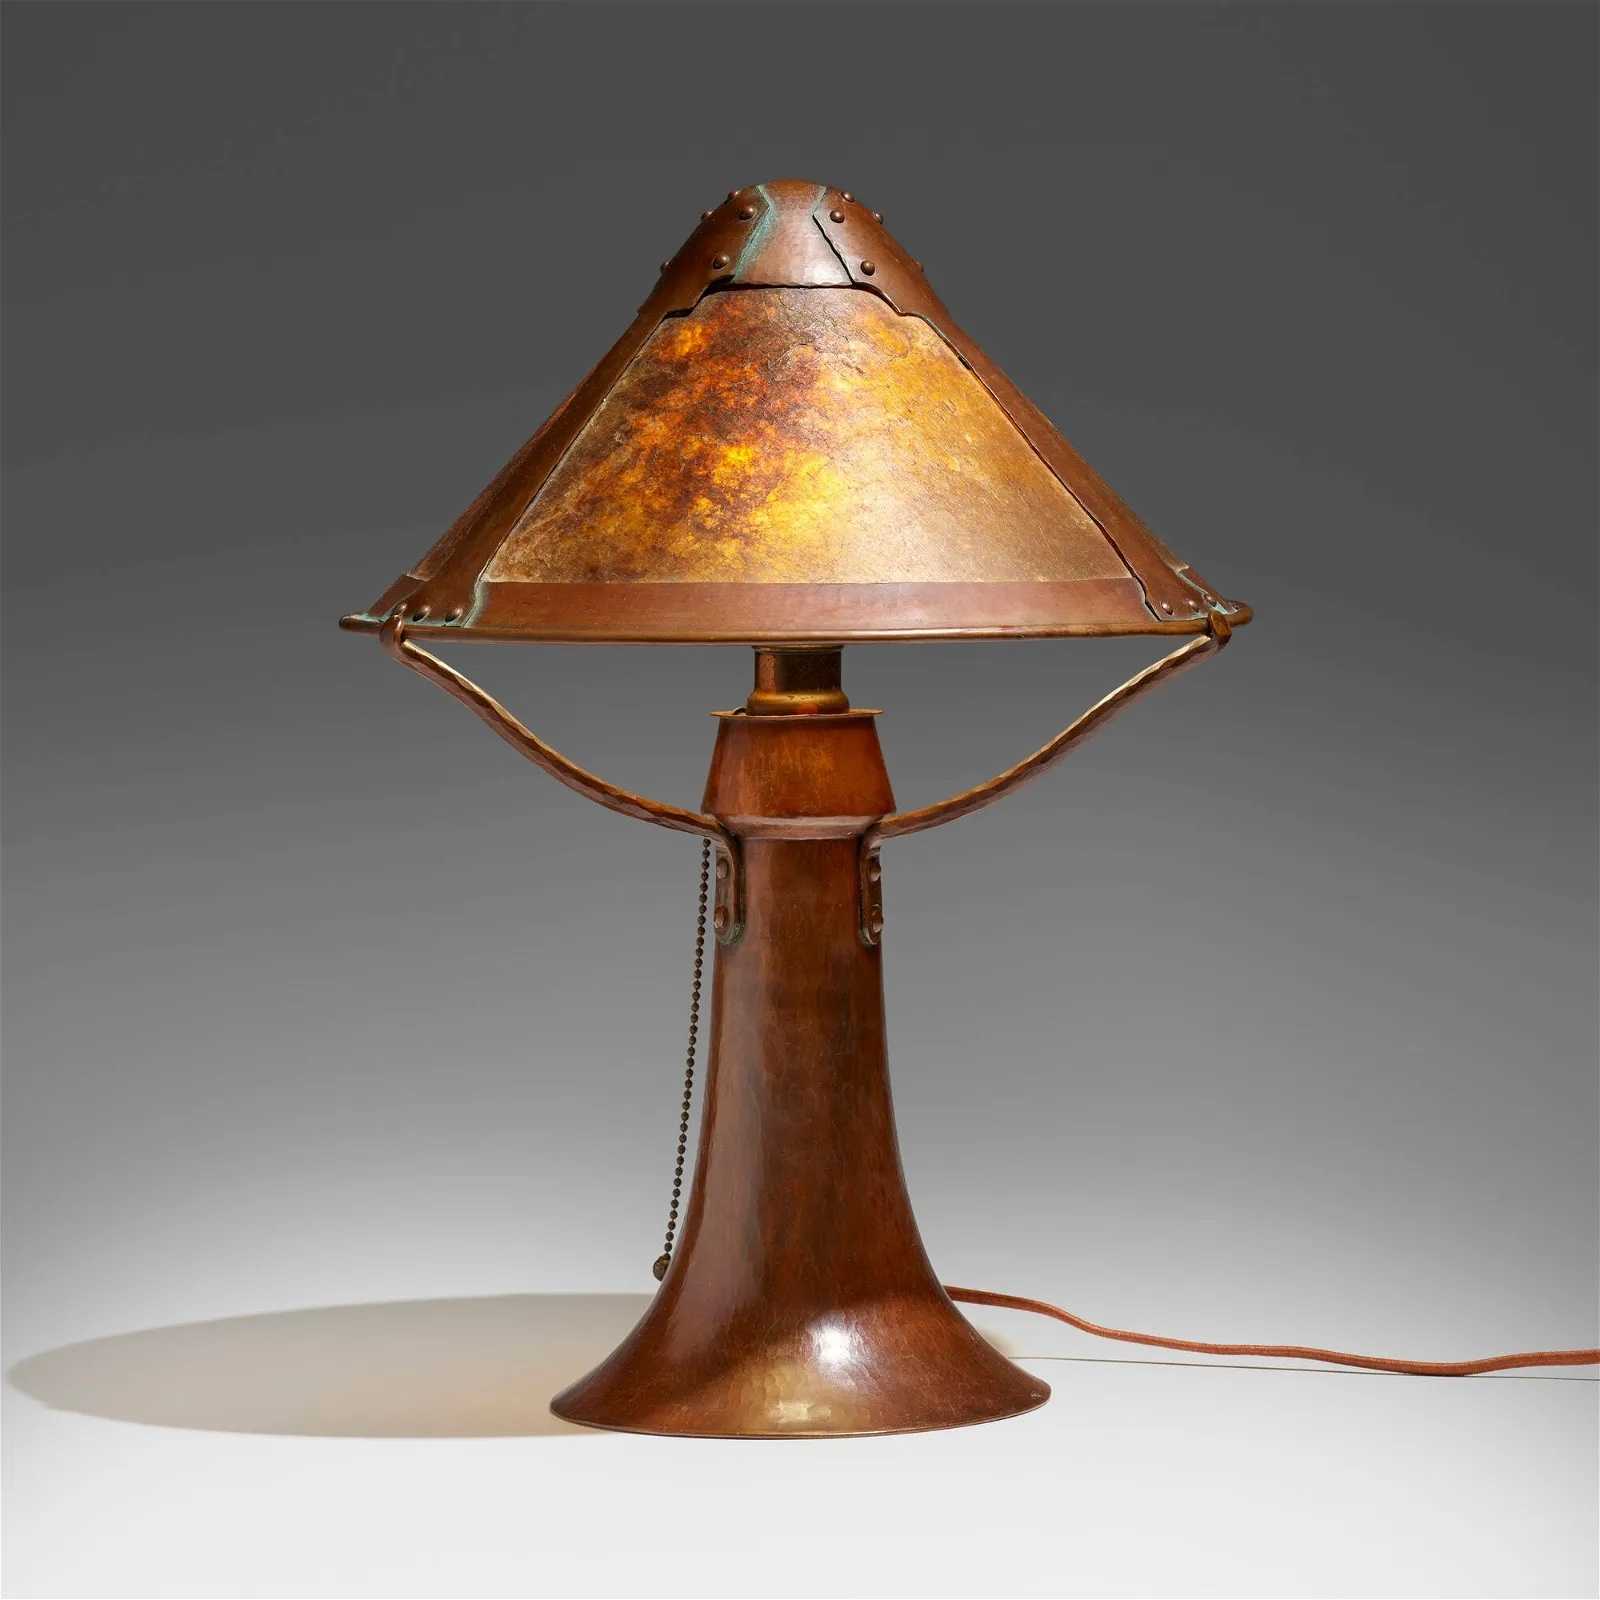 Dirk van Erp and Eleanor Elizabeth D'Arcy Gaw table lamp, which sold for $17,000 ($22,270 with buyer’s premium) at Toomey.